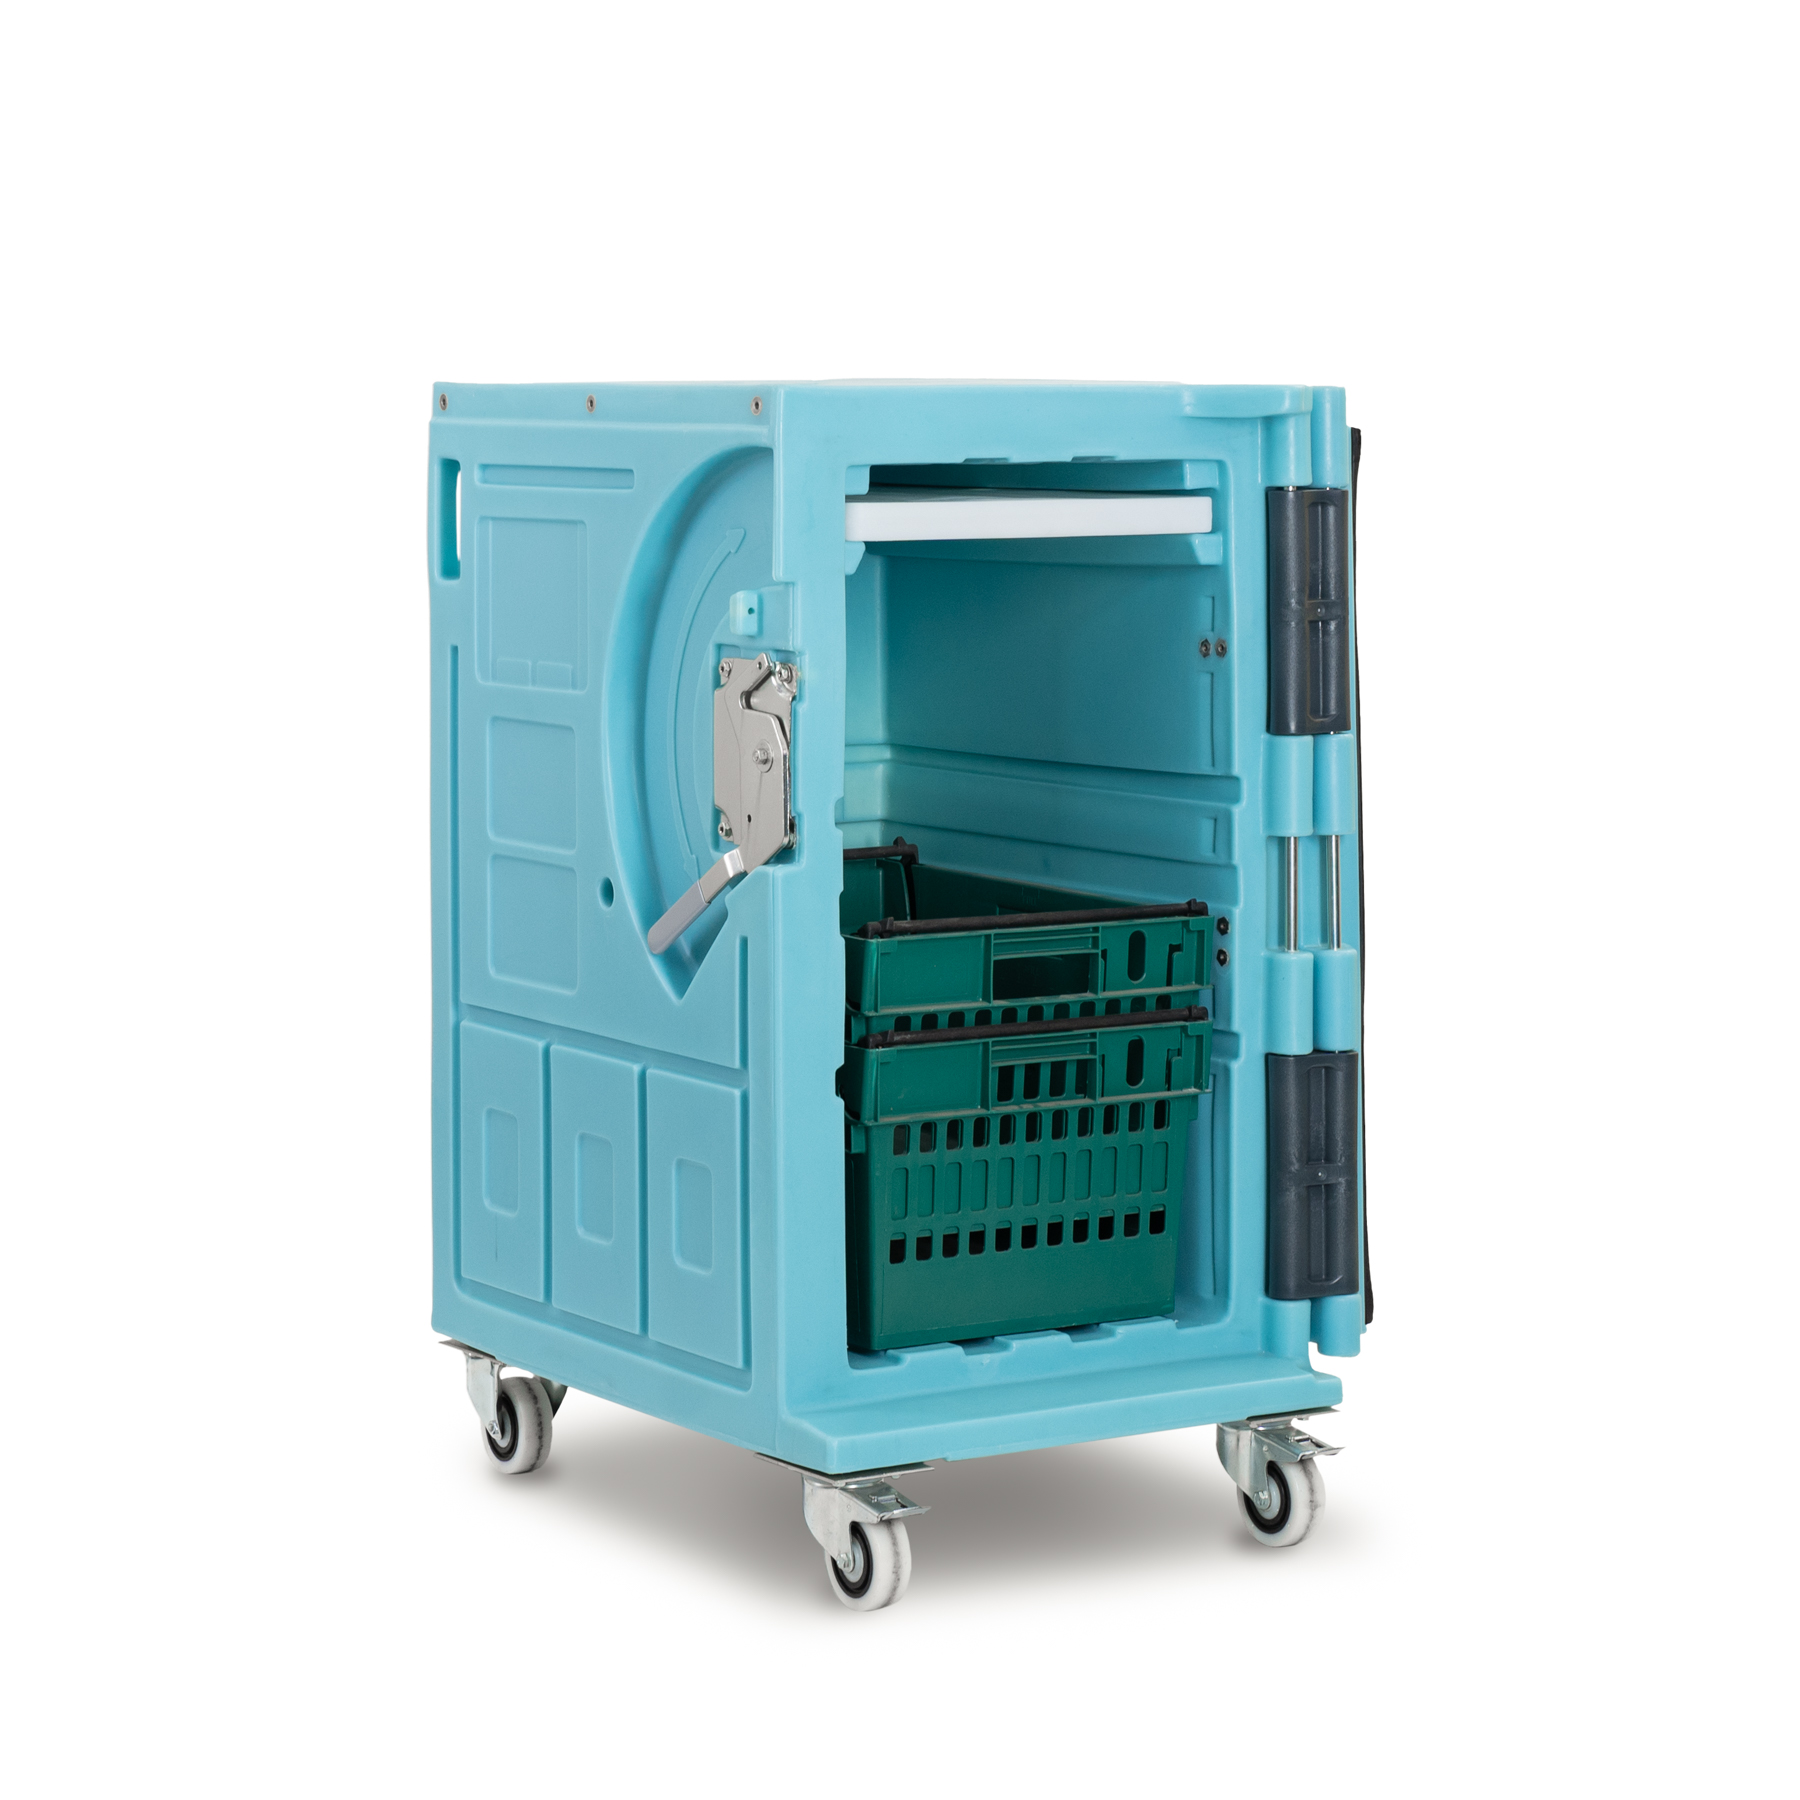 INSULATED ROLL 220 OLIVO EURONORME CRATE